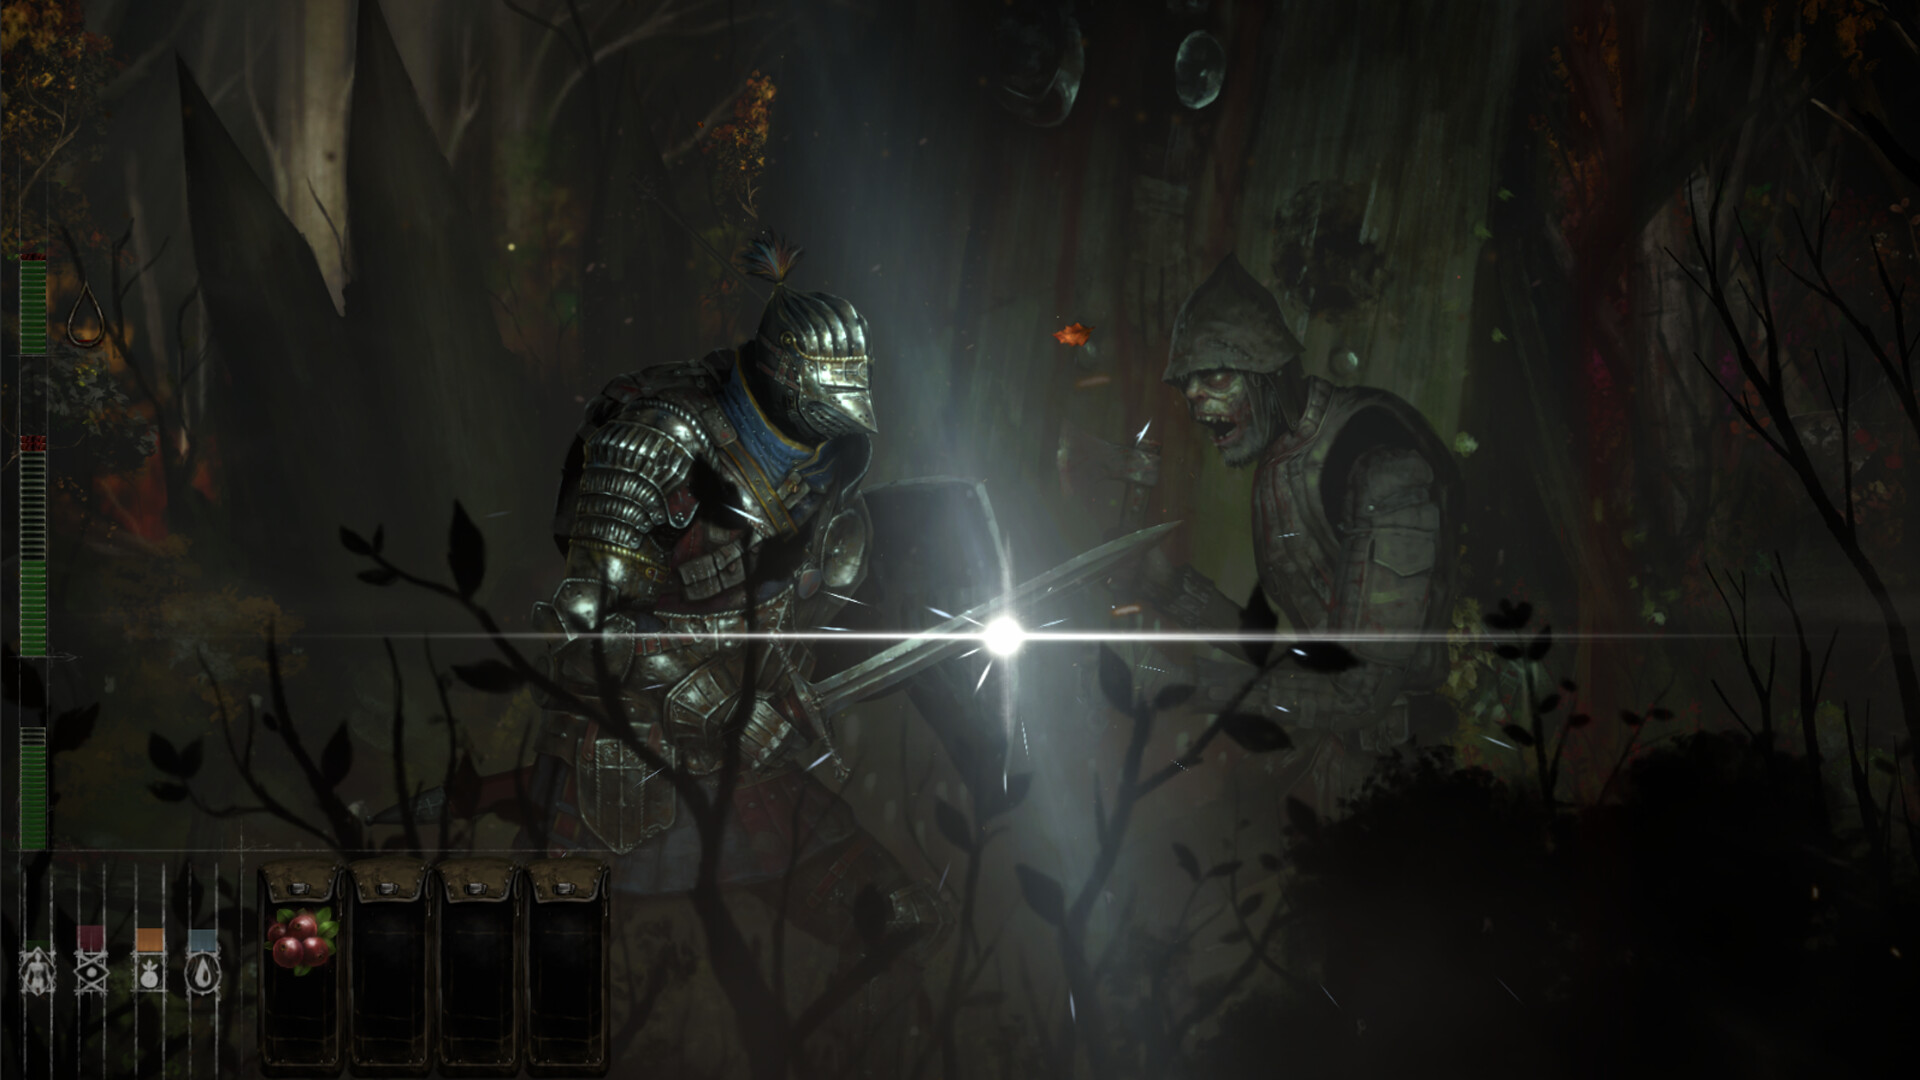 Two characters fighting with swords in a dark background. Image is from game NightFall Shade.